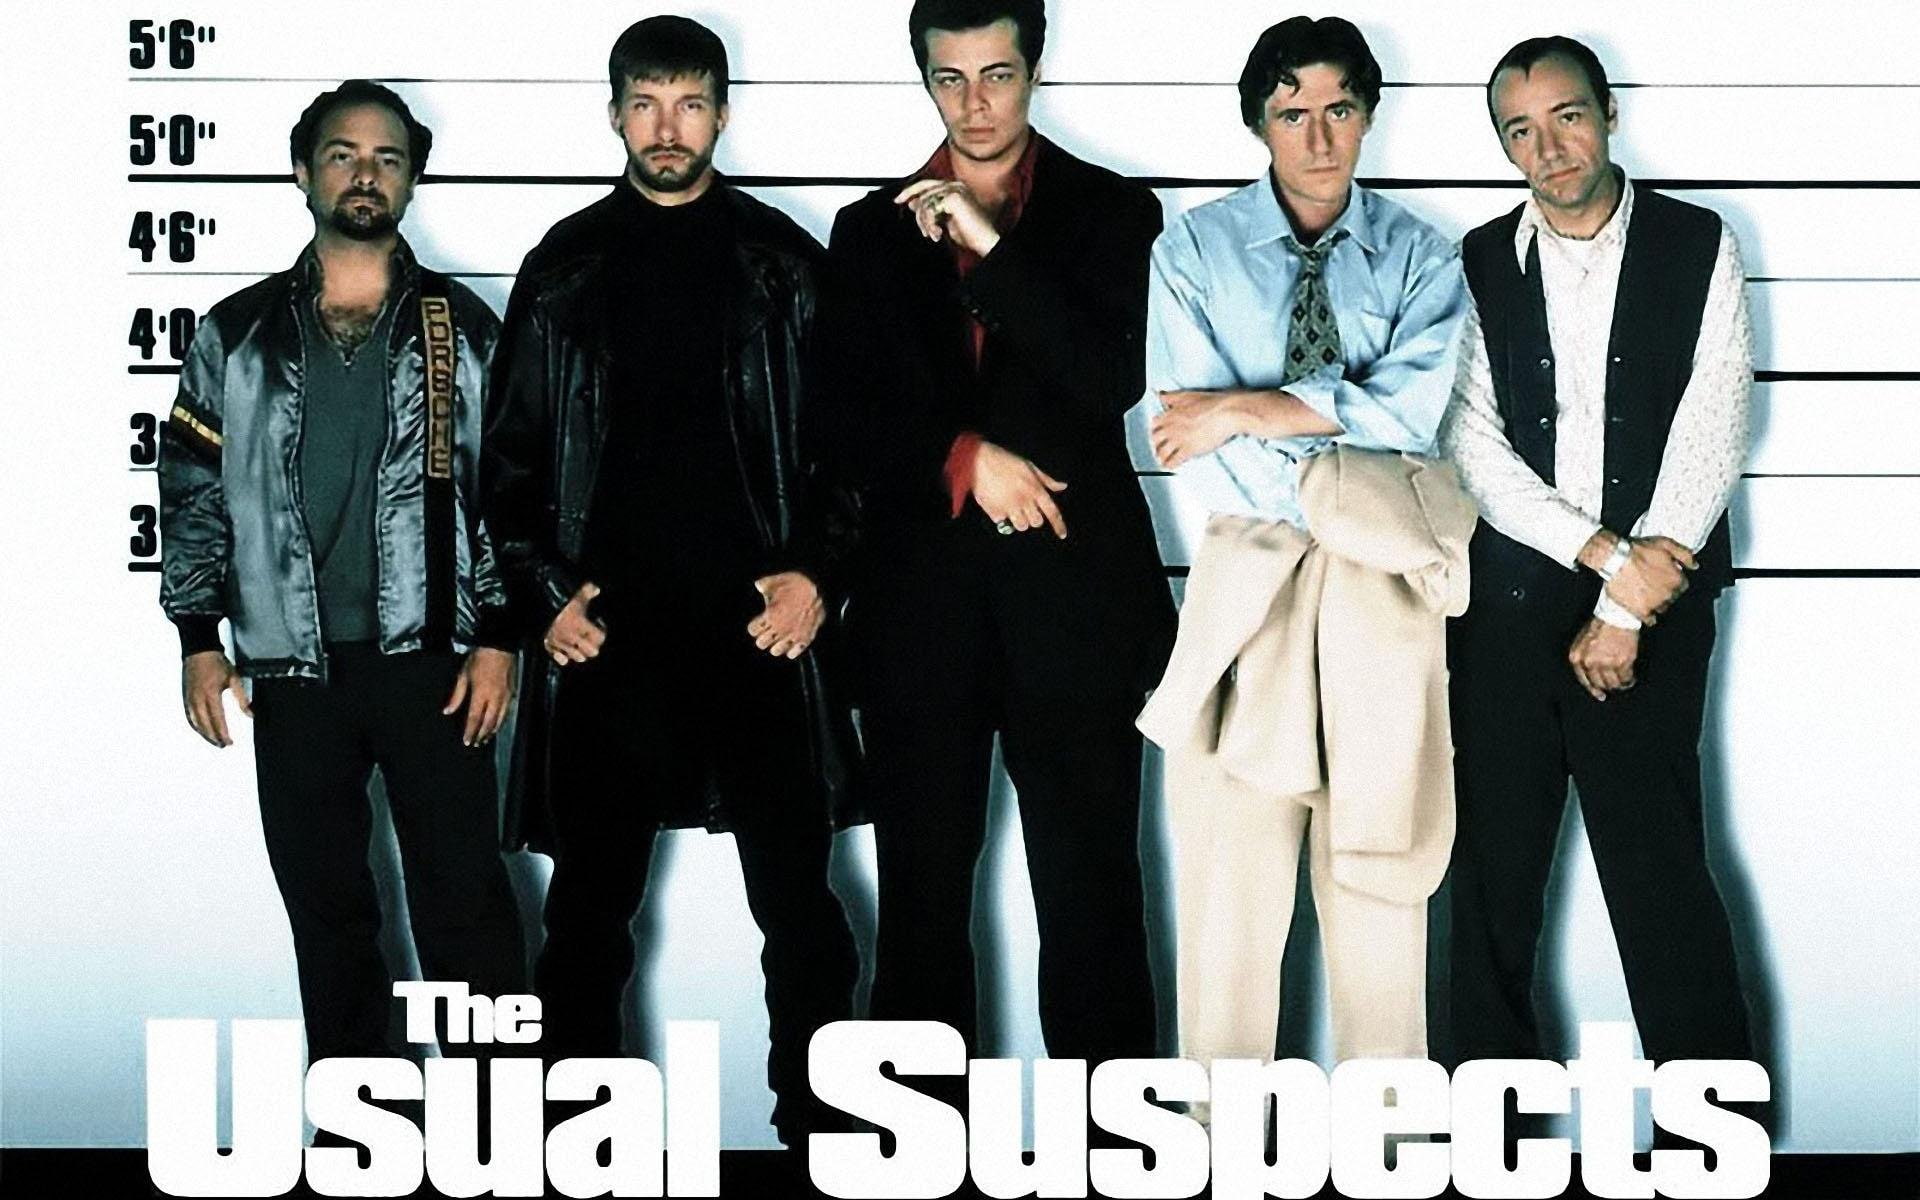 crime, drama, mystery, suspects, the, thriller, usual, usual-suspects